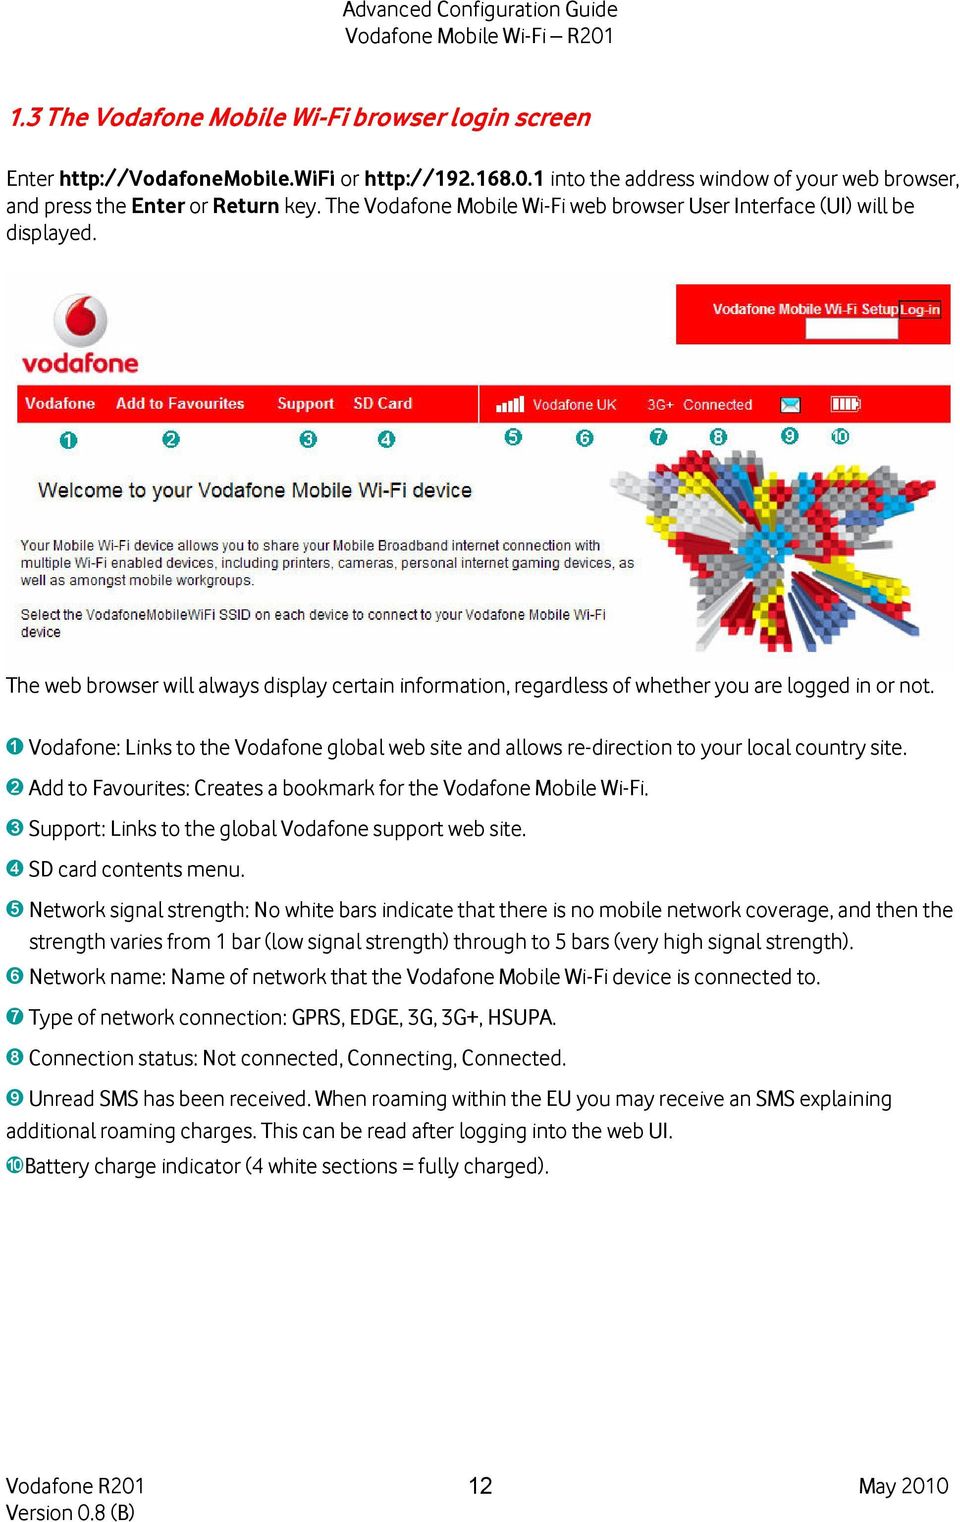 ➊ Vodafone: Links to the Vodafone global web site and allows re-direction to your local country site. ➋ Add to Favourites: Creates a bookmark for the Vodafone Mobile Wi-Fi.